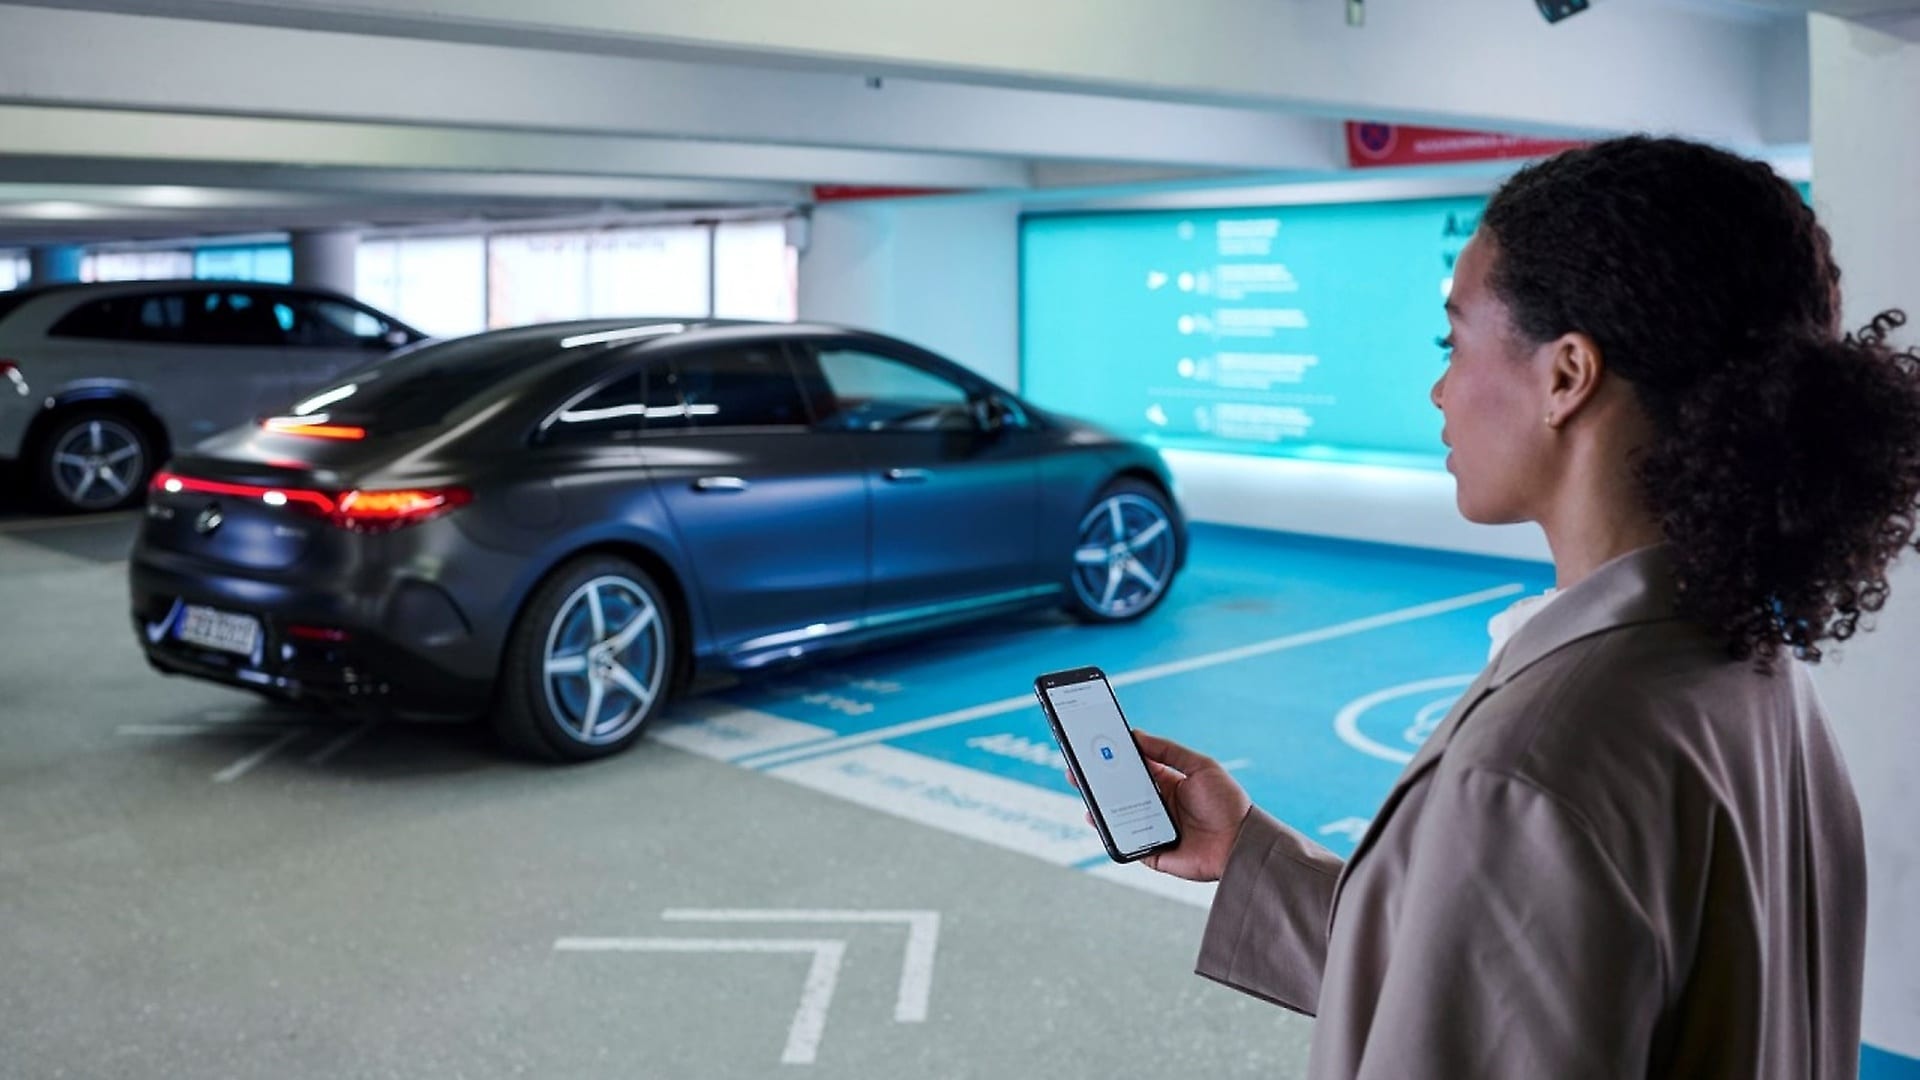 Via the Mercedes me App, the driver books a parking space in advance and can initiate the parking maneuver at the parking garage.